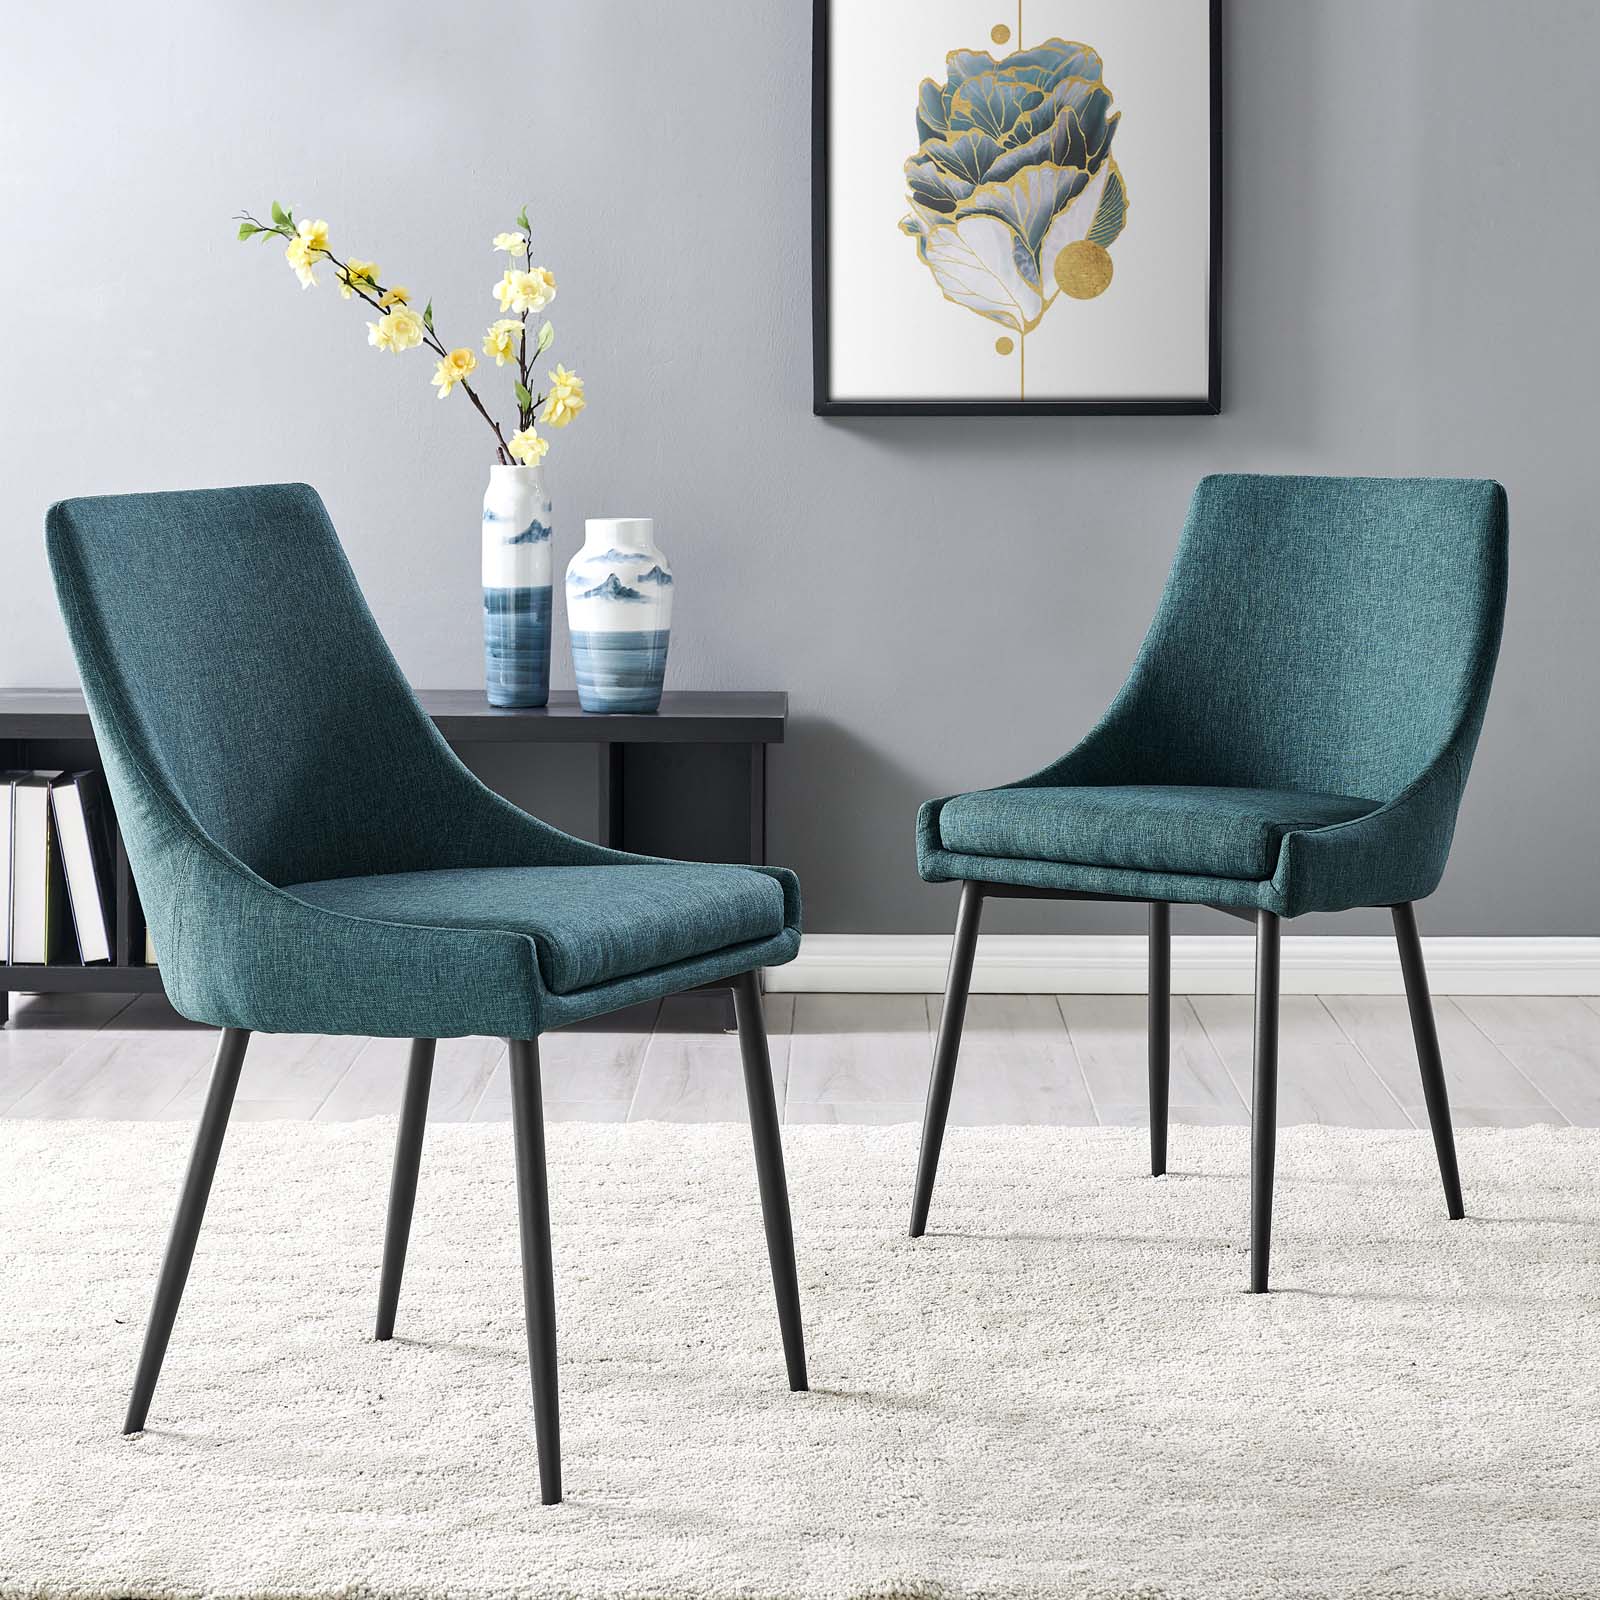 Modway Dining Chairs - Viscount Dining Chairs Black & Teal (Set Of 2)